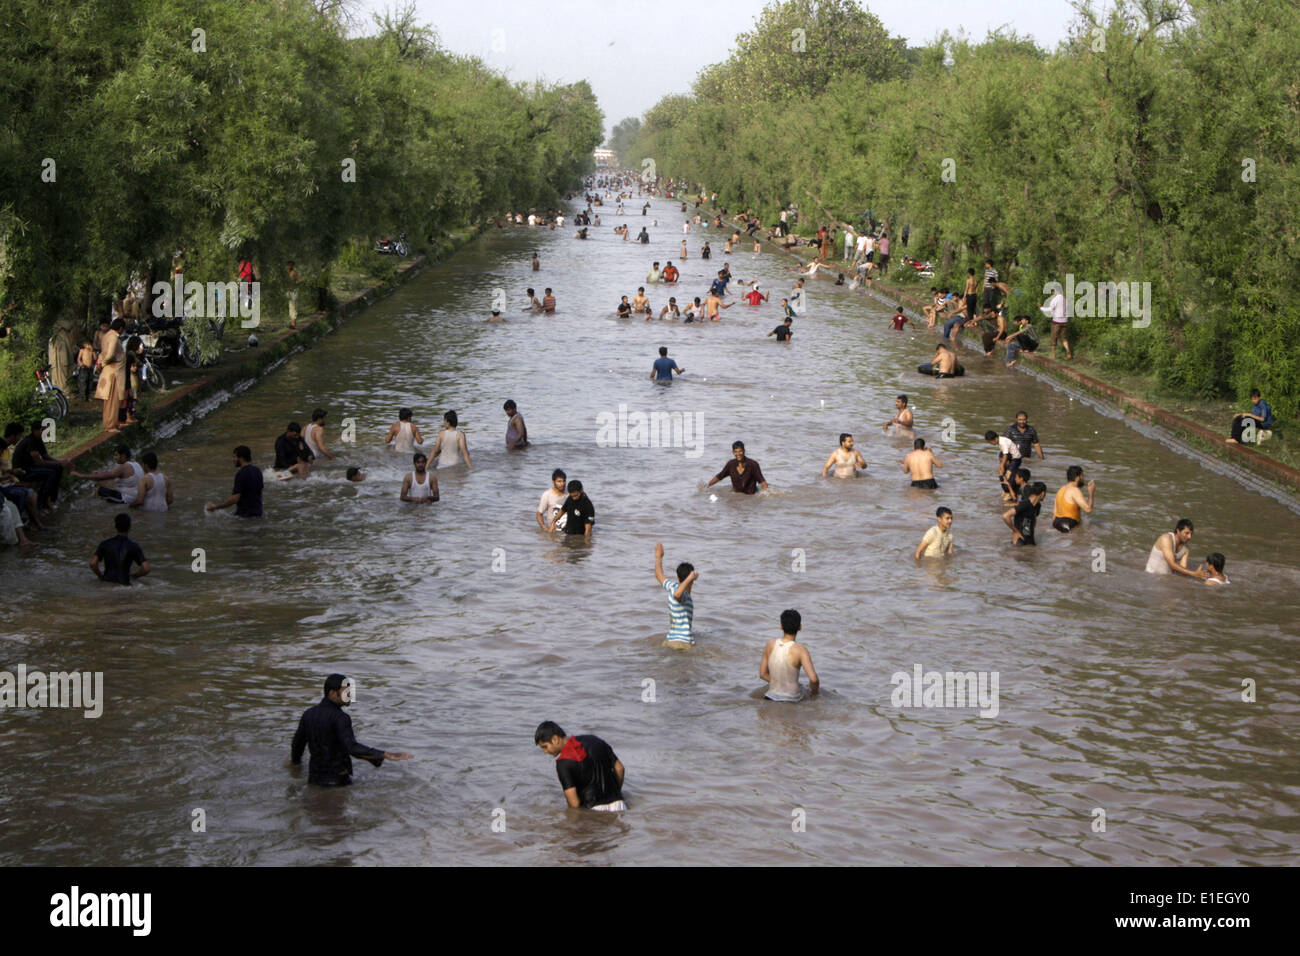 lahore-2nd-june-2014-people-swim-in-a-canal-to-beat-the-heat-as-temperature-E1EGY0.jpg